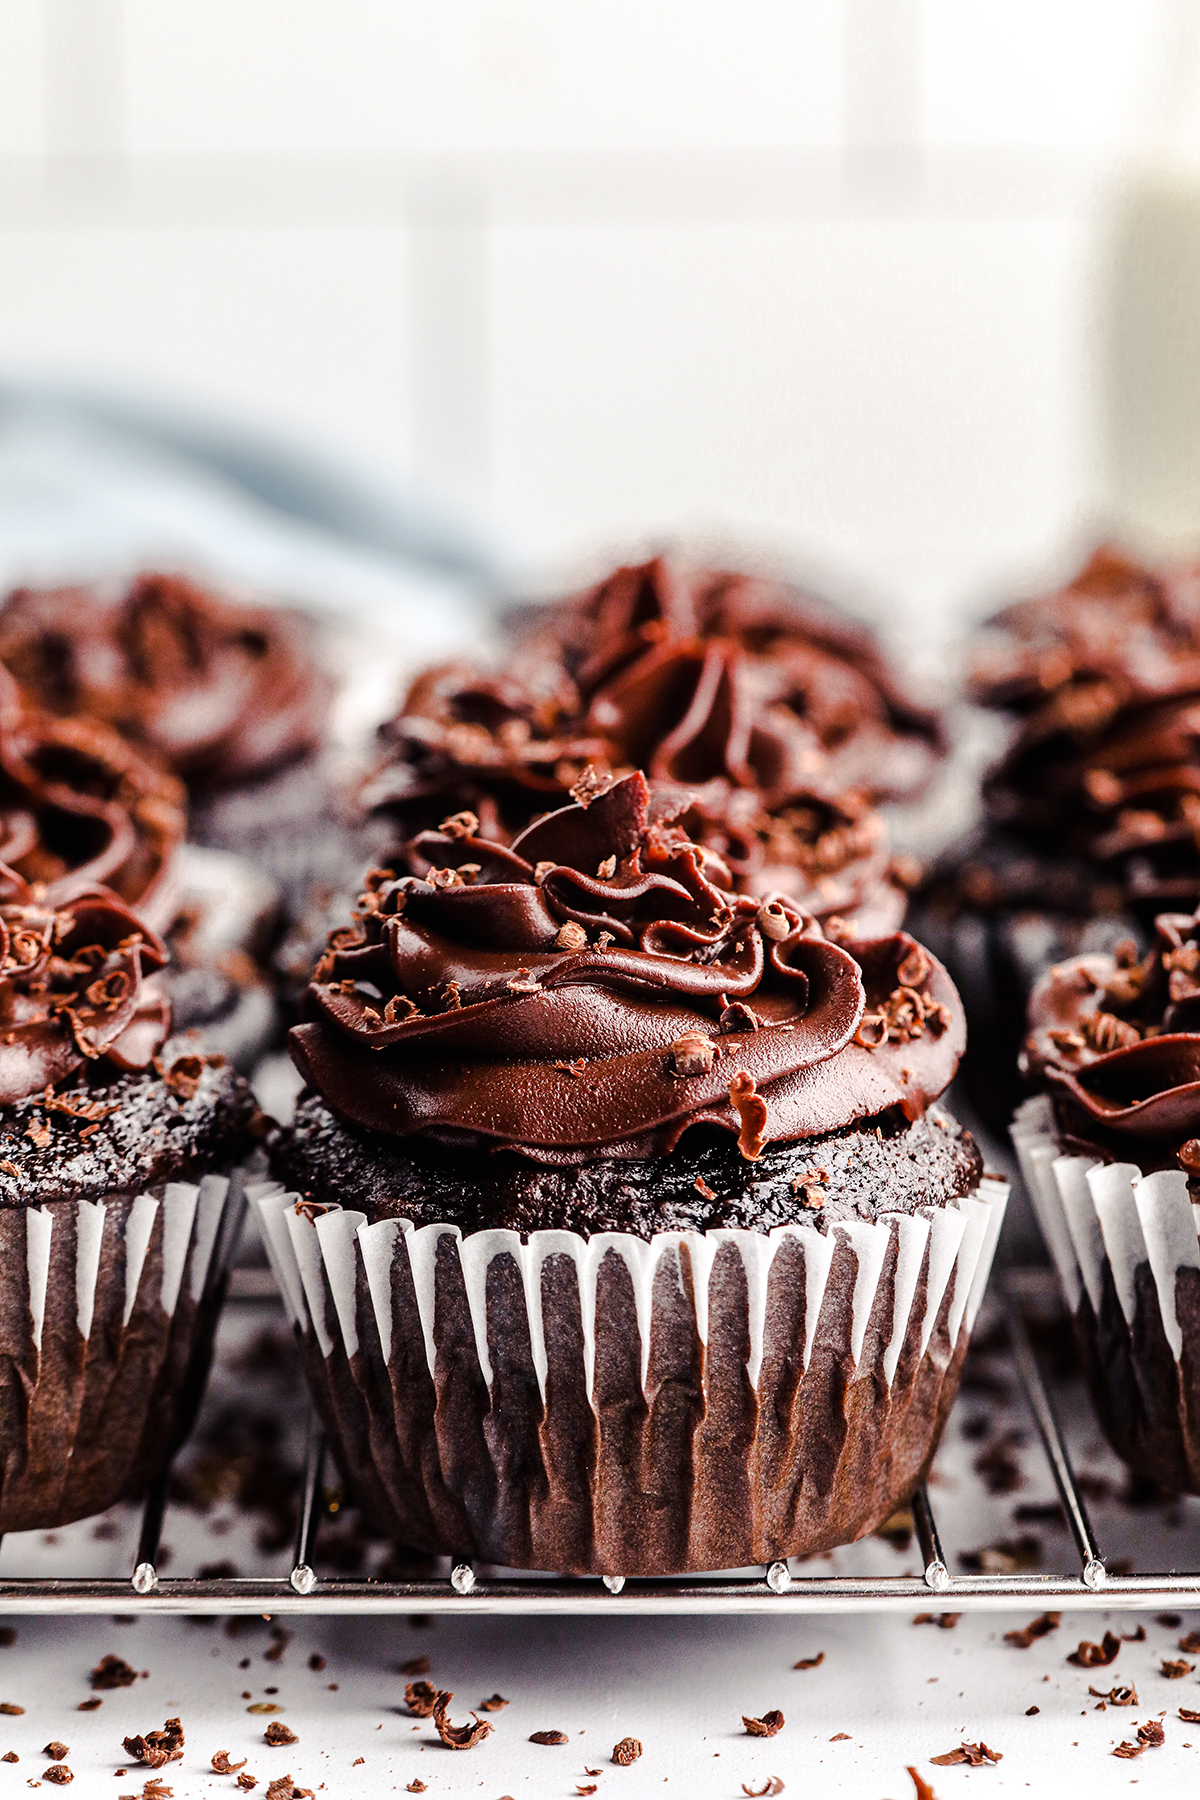 up close view of a batch of chocolate cupcakes with chocolate frosting and chocolate shavings on top.